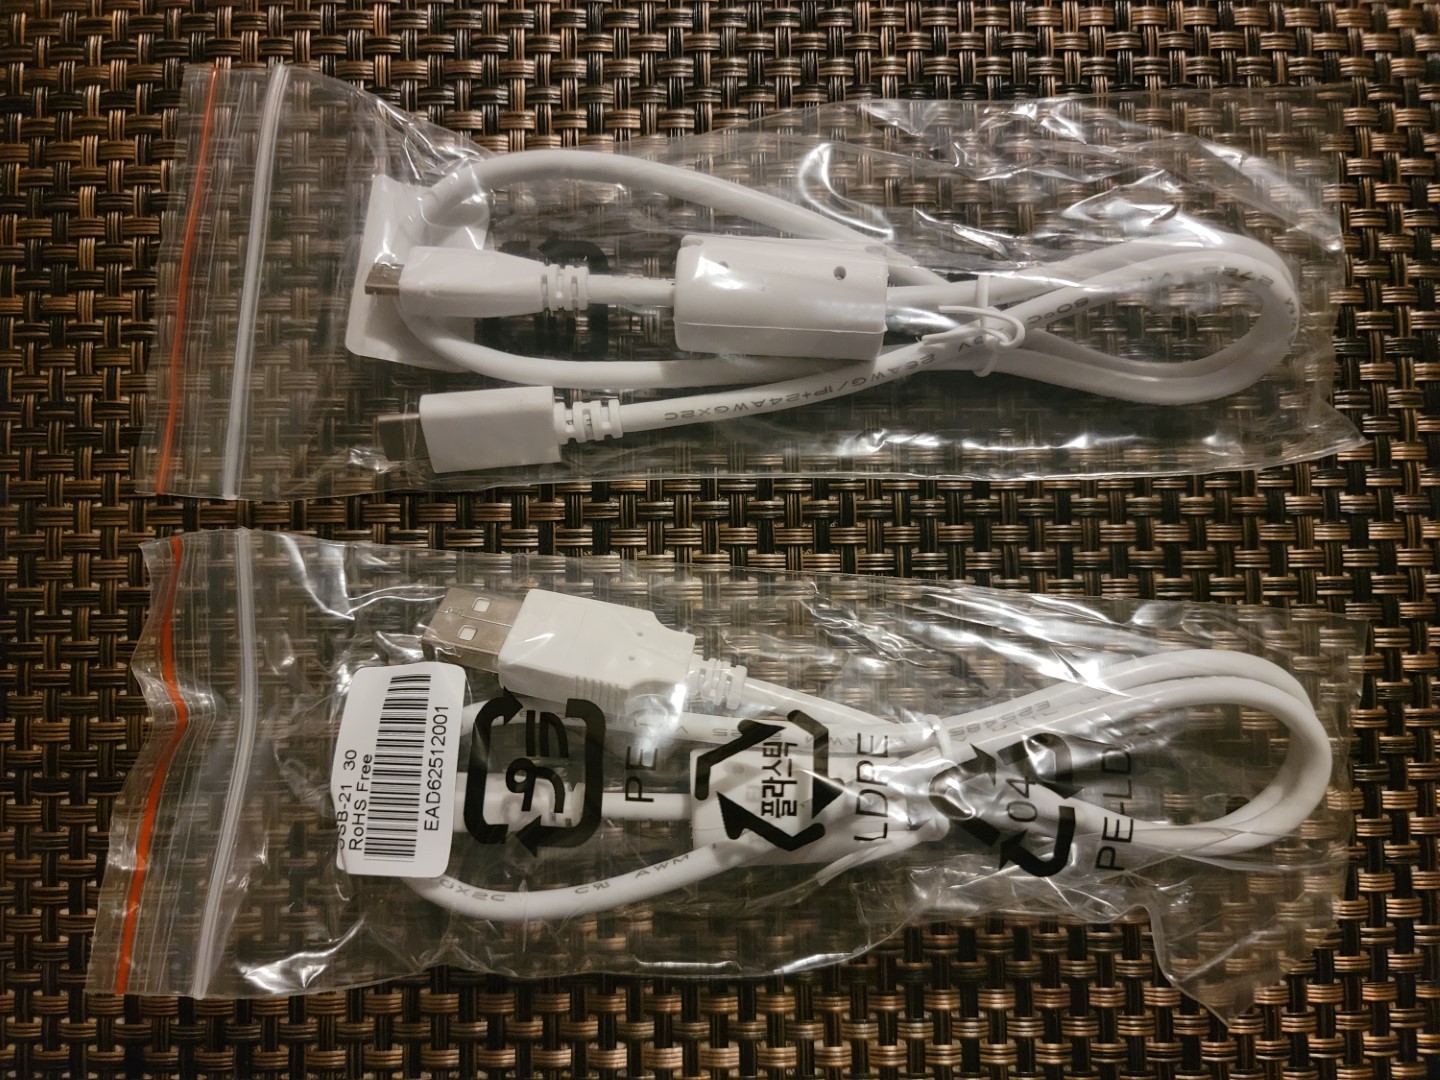 LG GPM2 BTS Violet Edition GPM2MV10 - USB Cables unopened.